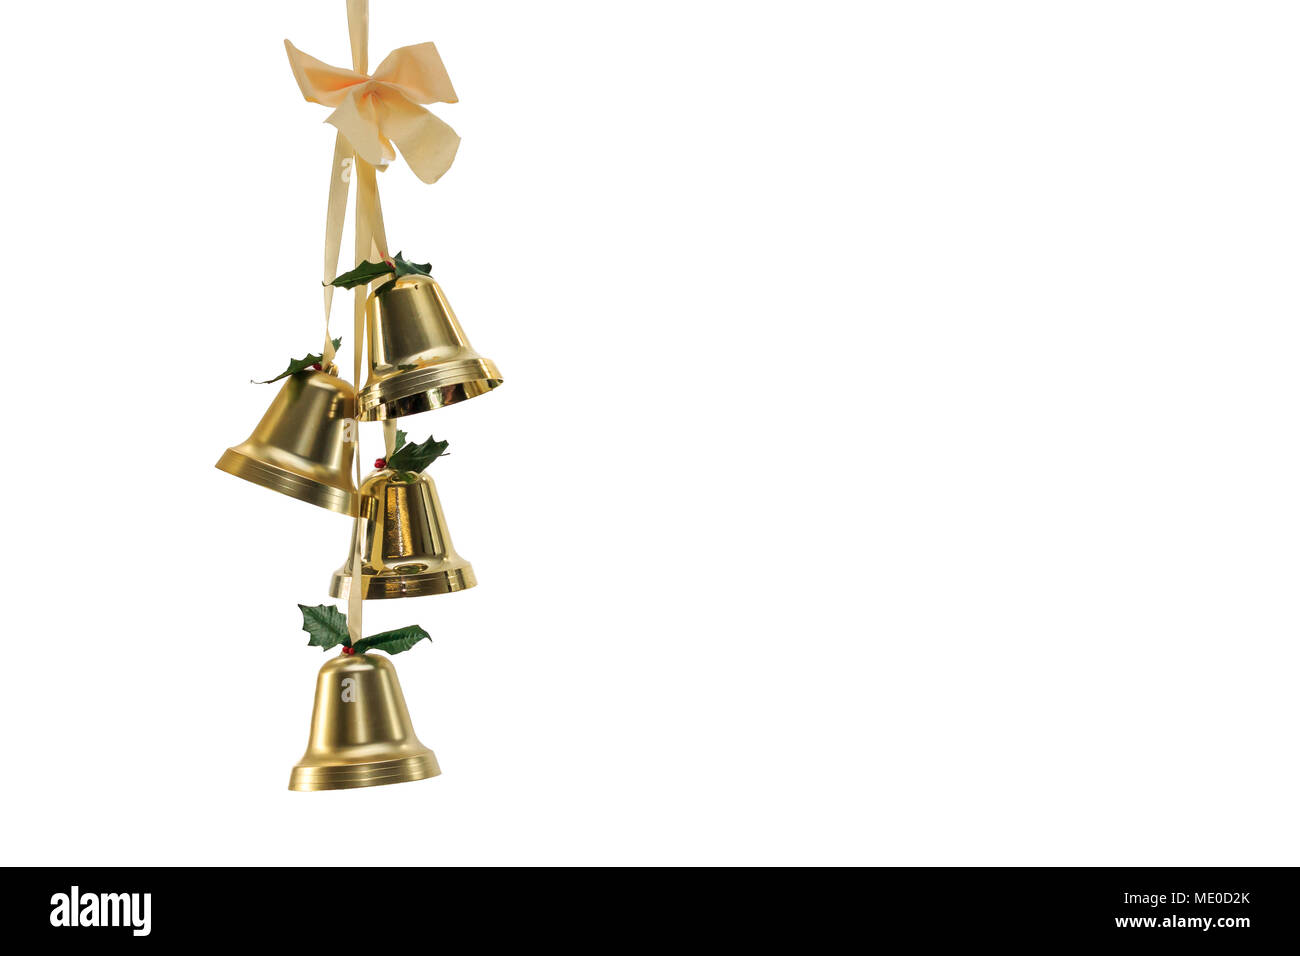 Four Gold Christmas Bells hanging from ribbons with a bow isolated on white background Stock Photo